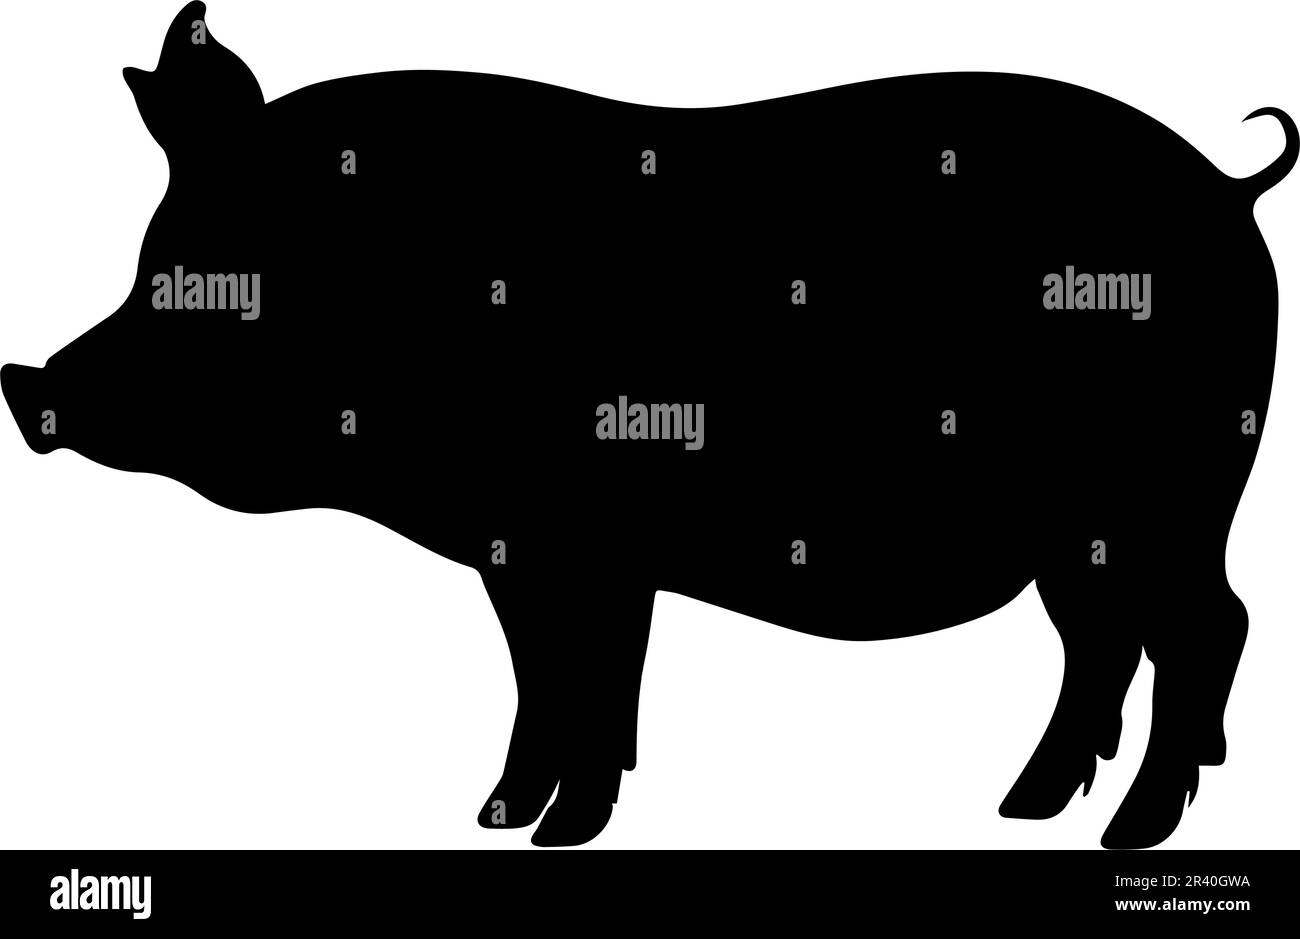 Pig silhouette isolated on white background. vector illustration Stock Vector